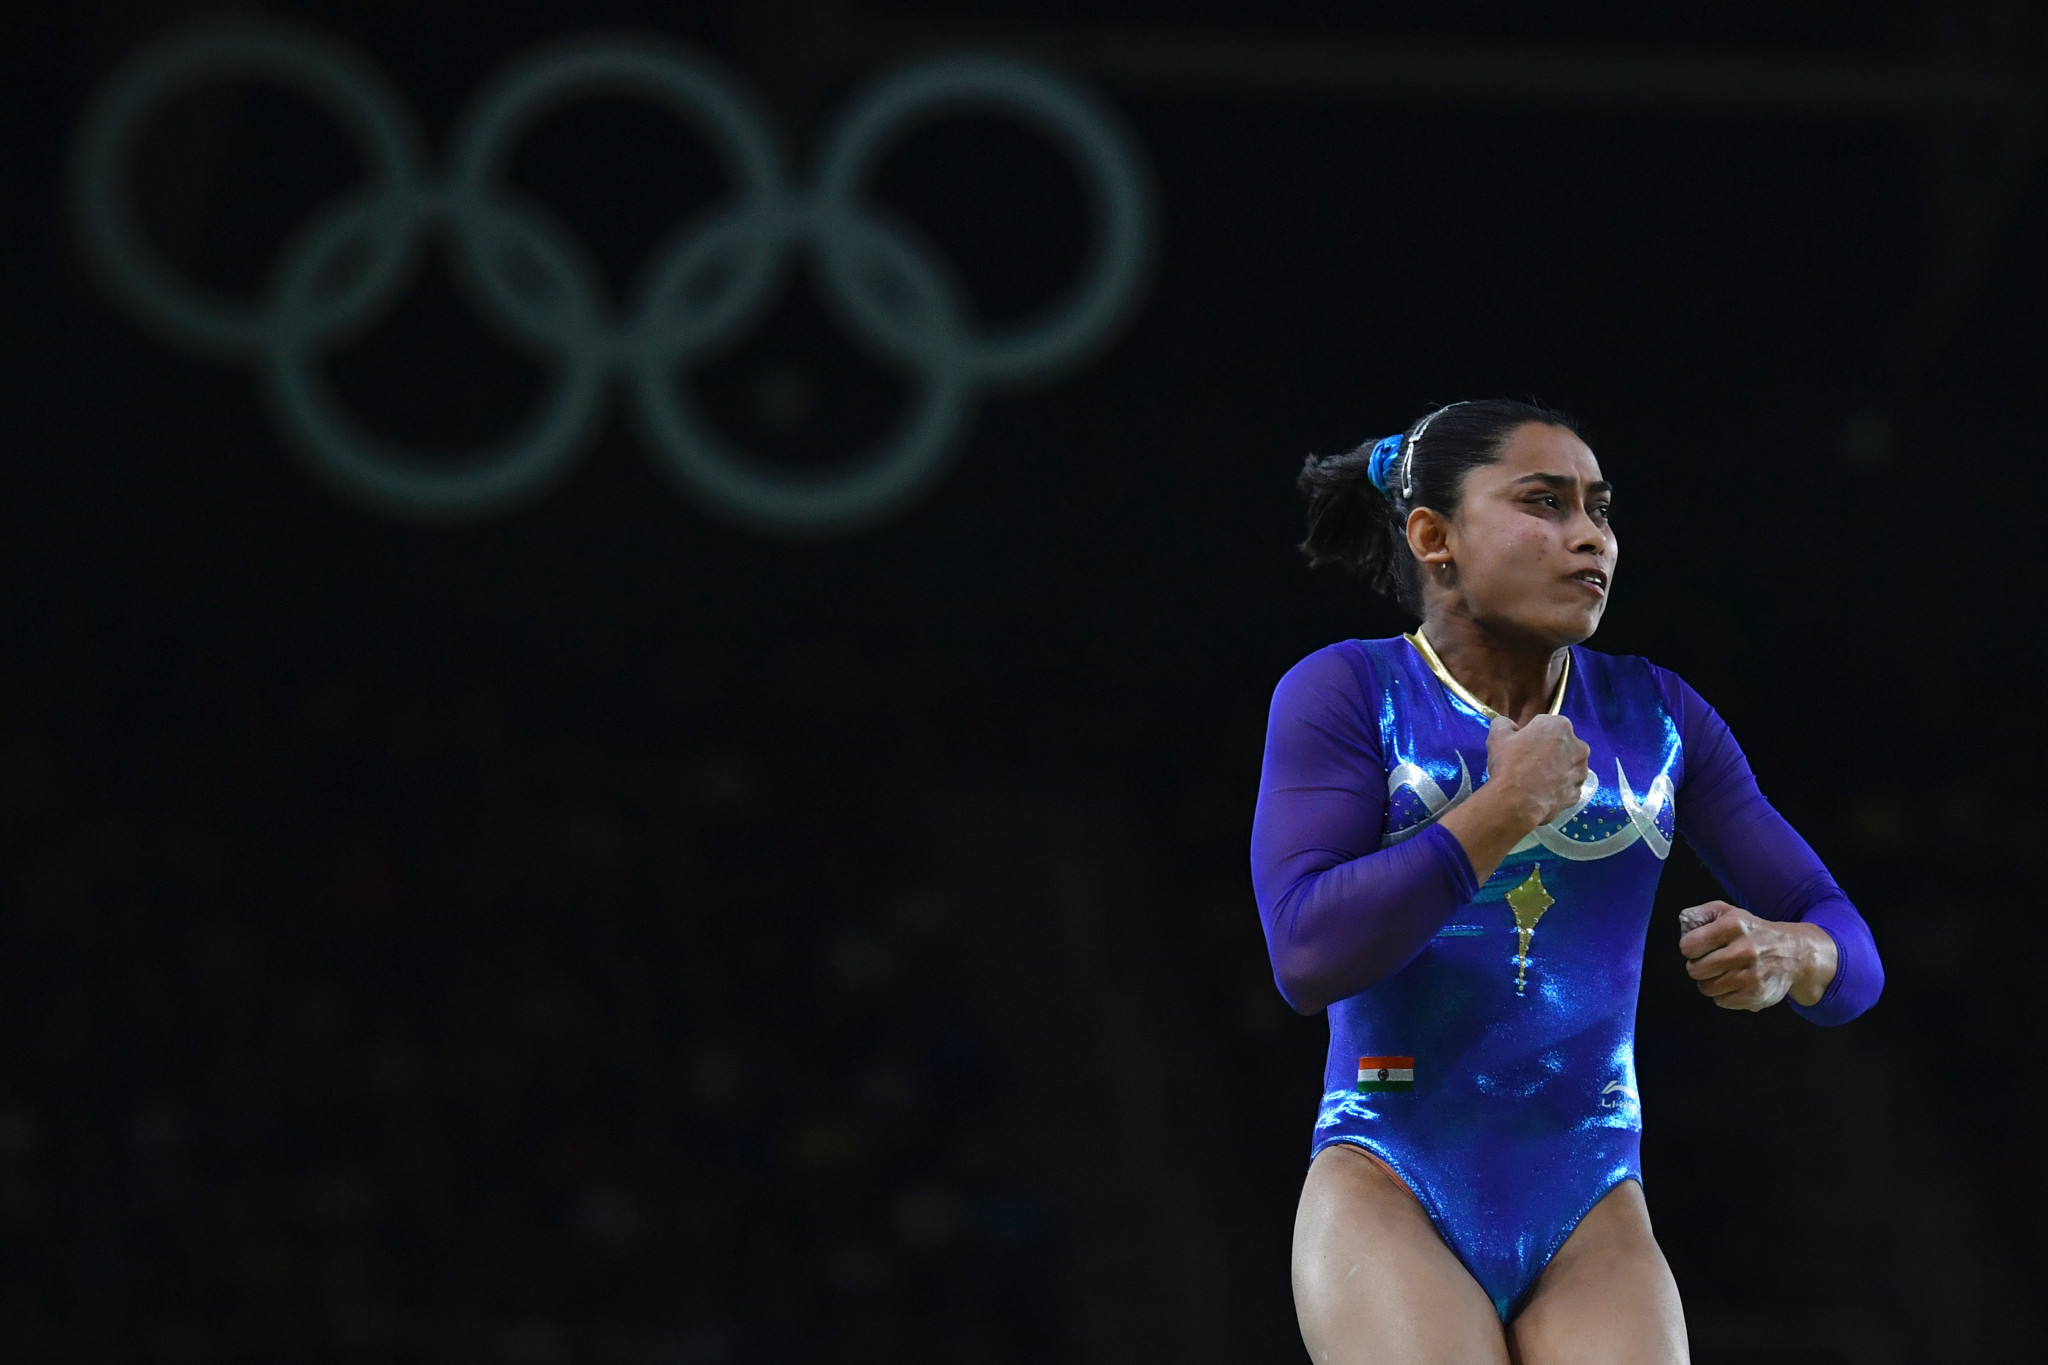 Commonwealth Games gymnastics bronze medallist latest Indian athlete caught up in doping controversy 